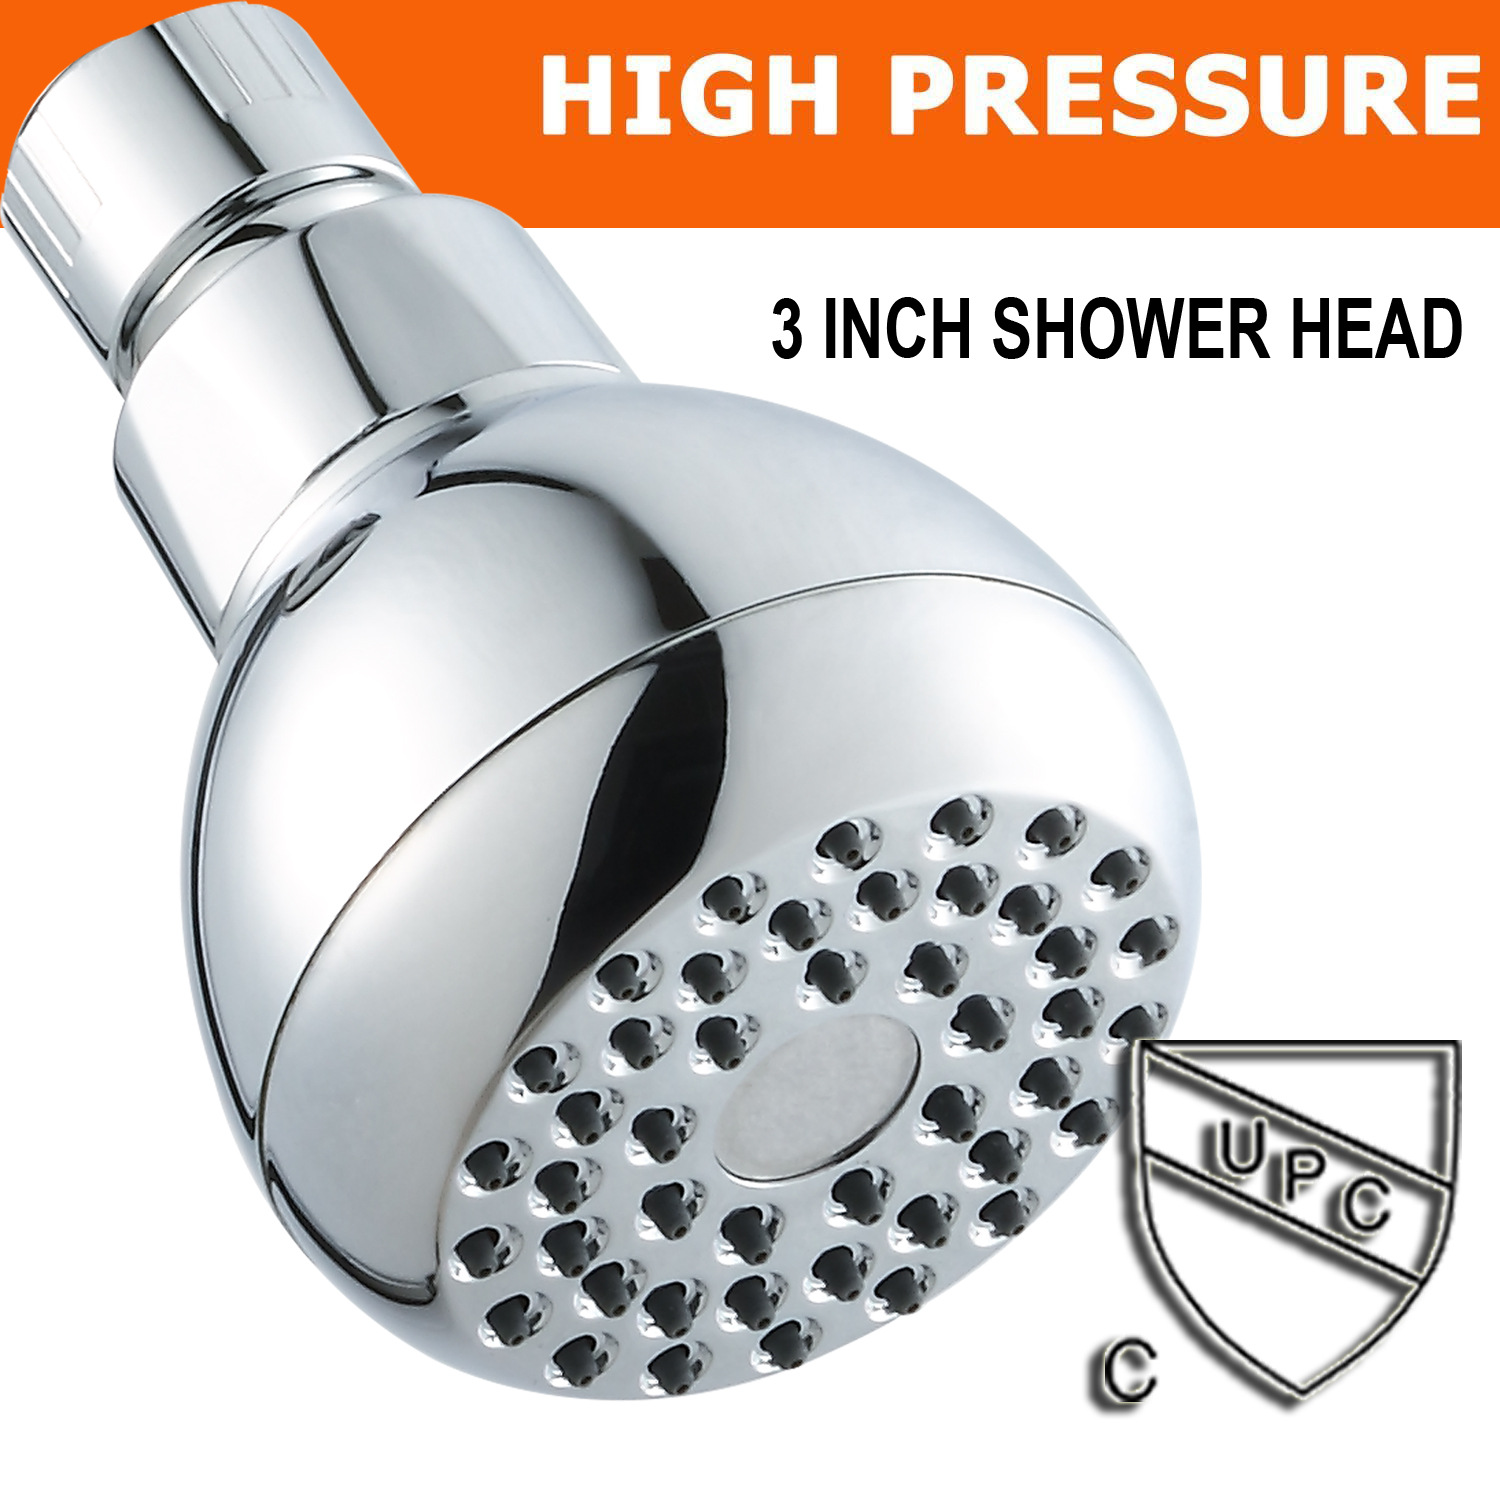 GZSC Shower Head New Replacement Filter balls saving Water SPA shower head with stop button 3 Modes adjustable high pressure shower head Color : C193 1, Shower Head Size : 3 inch 